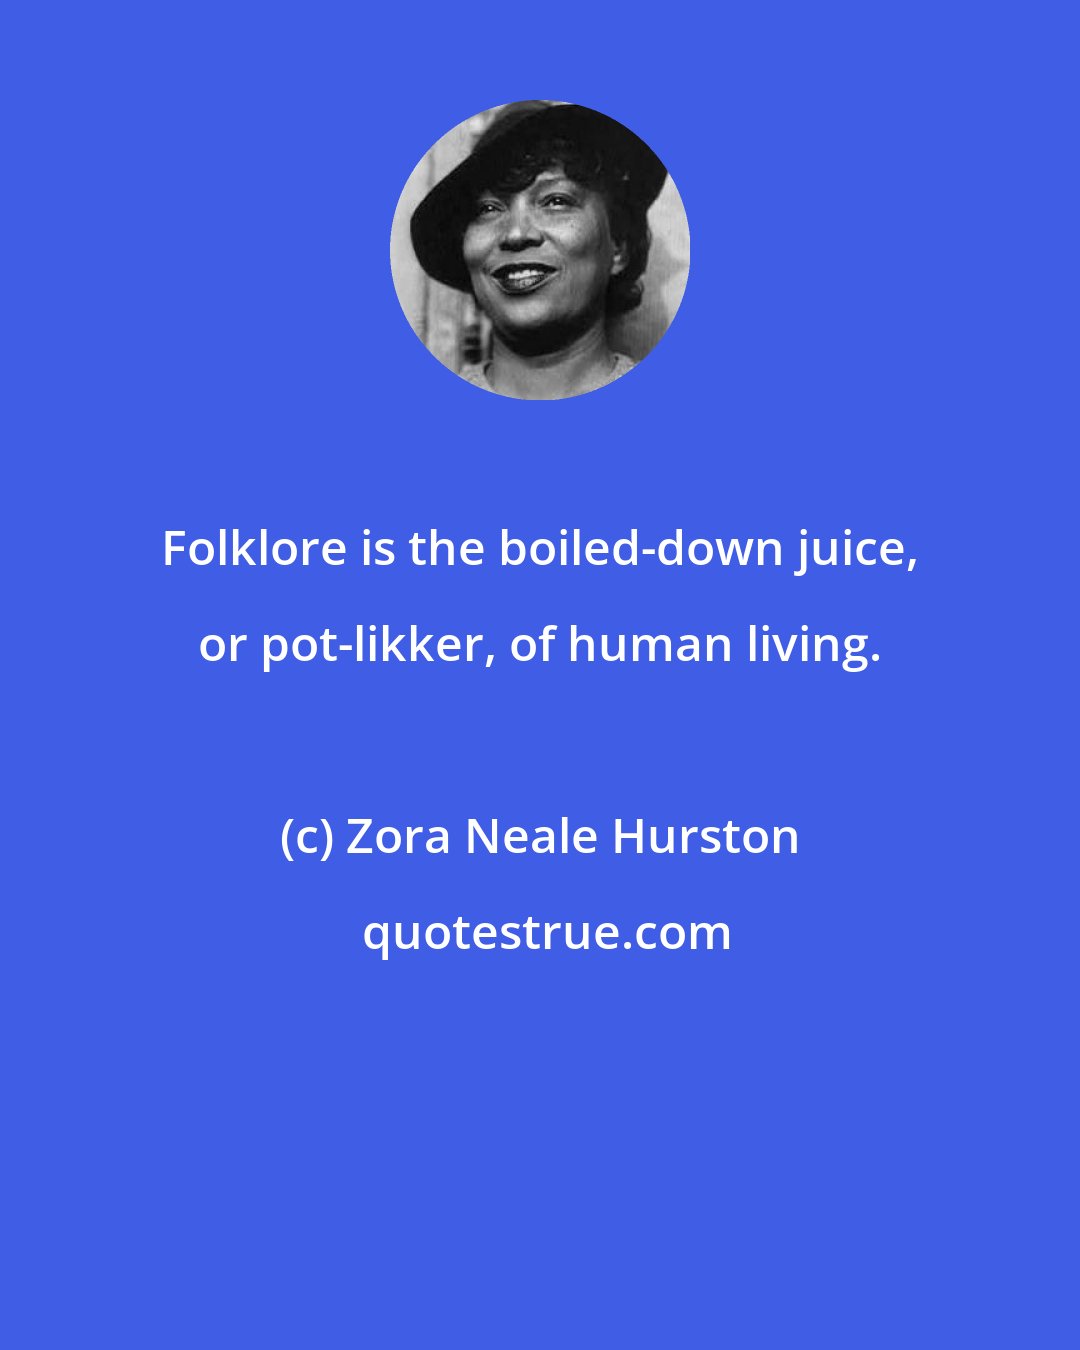 Zora Neale Hurston: Folklore is the boiled-down juice, or pot-likker, of human living.